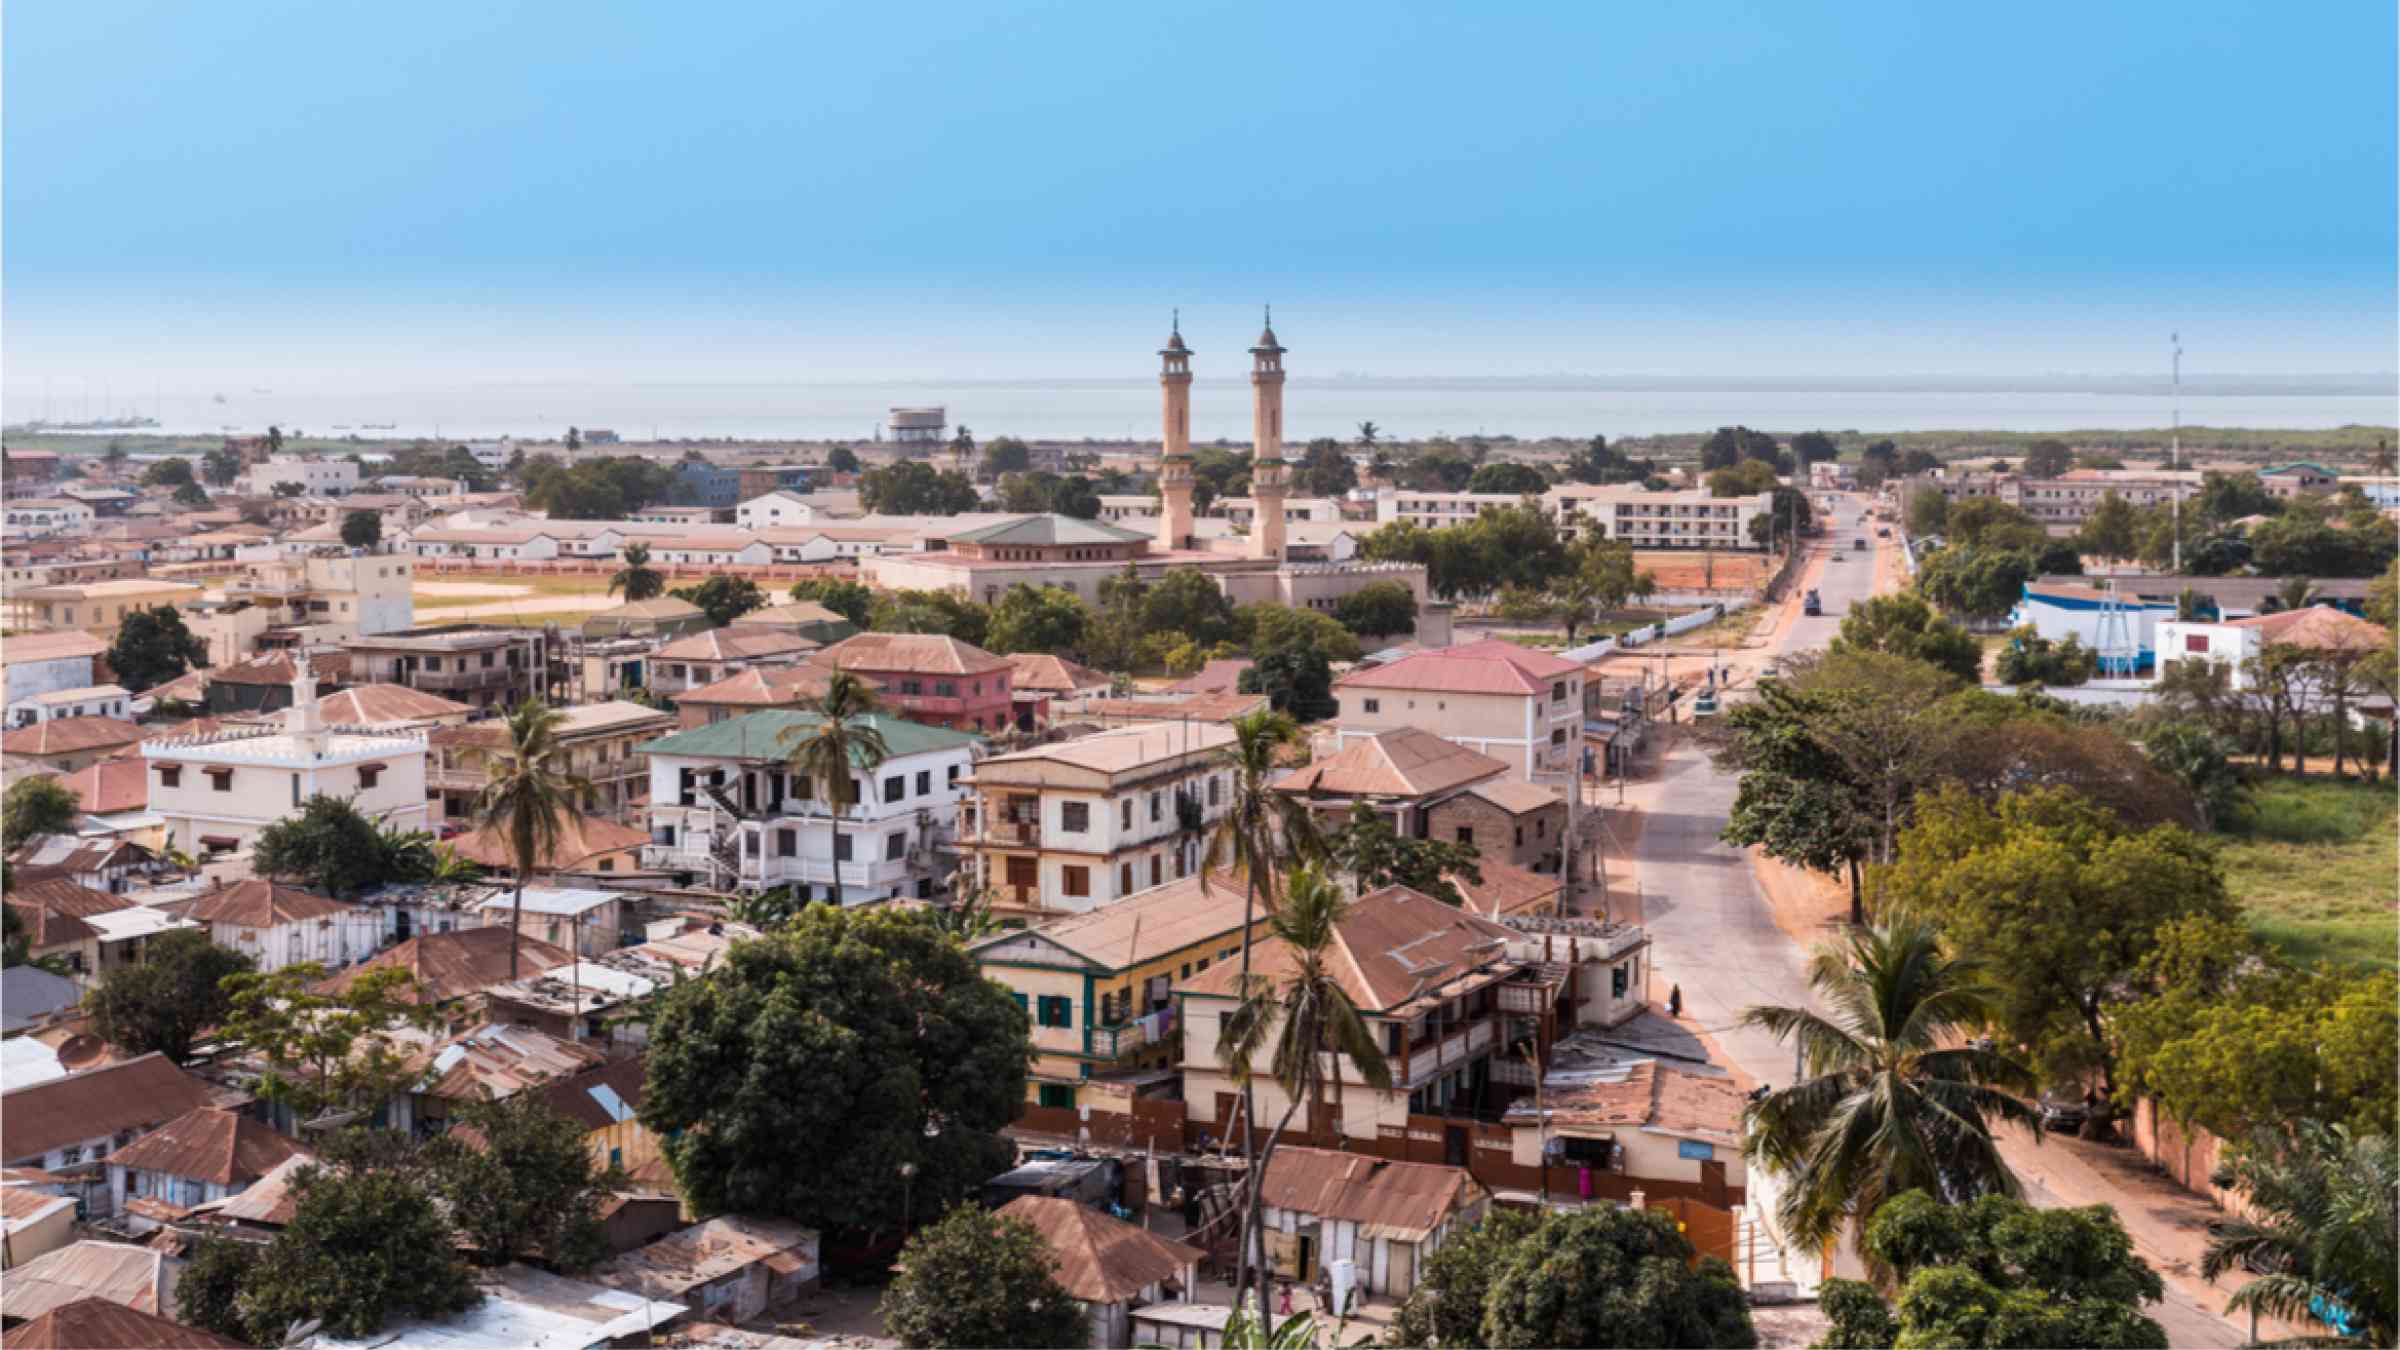 Look over Banjul in The Gambia.